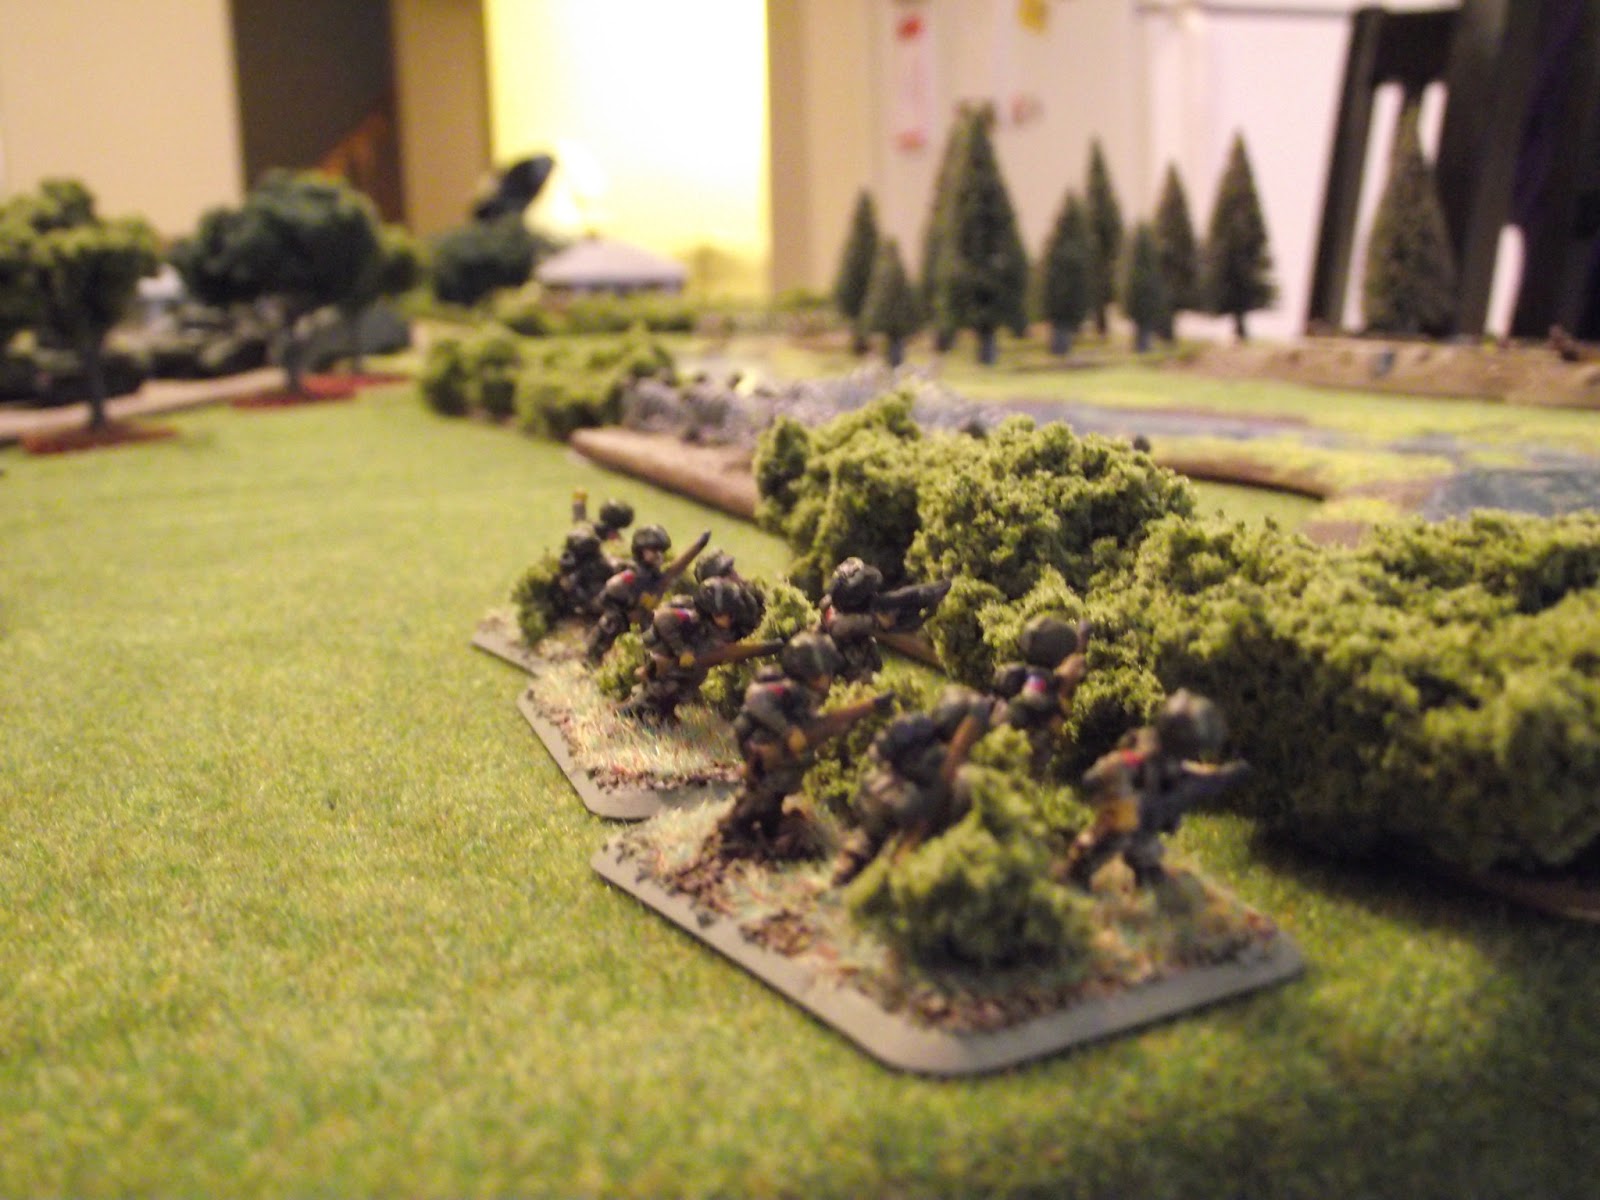  US Paratroops move up to lay some fire down on the Germans across the river in the trench. 